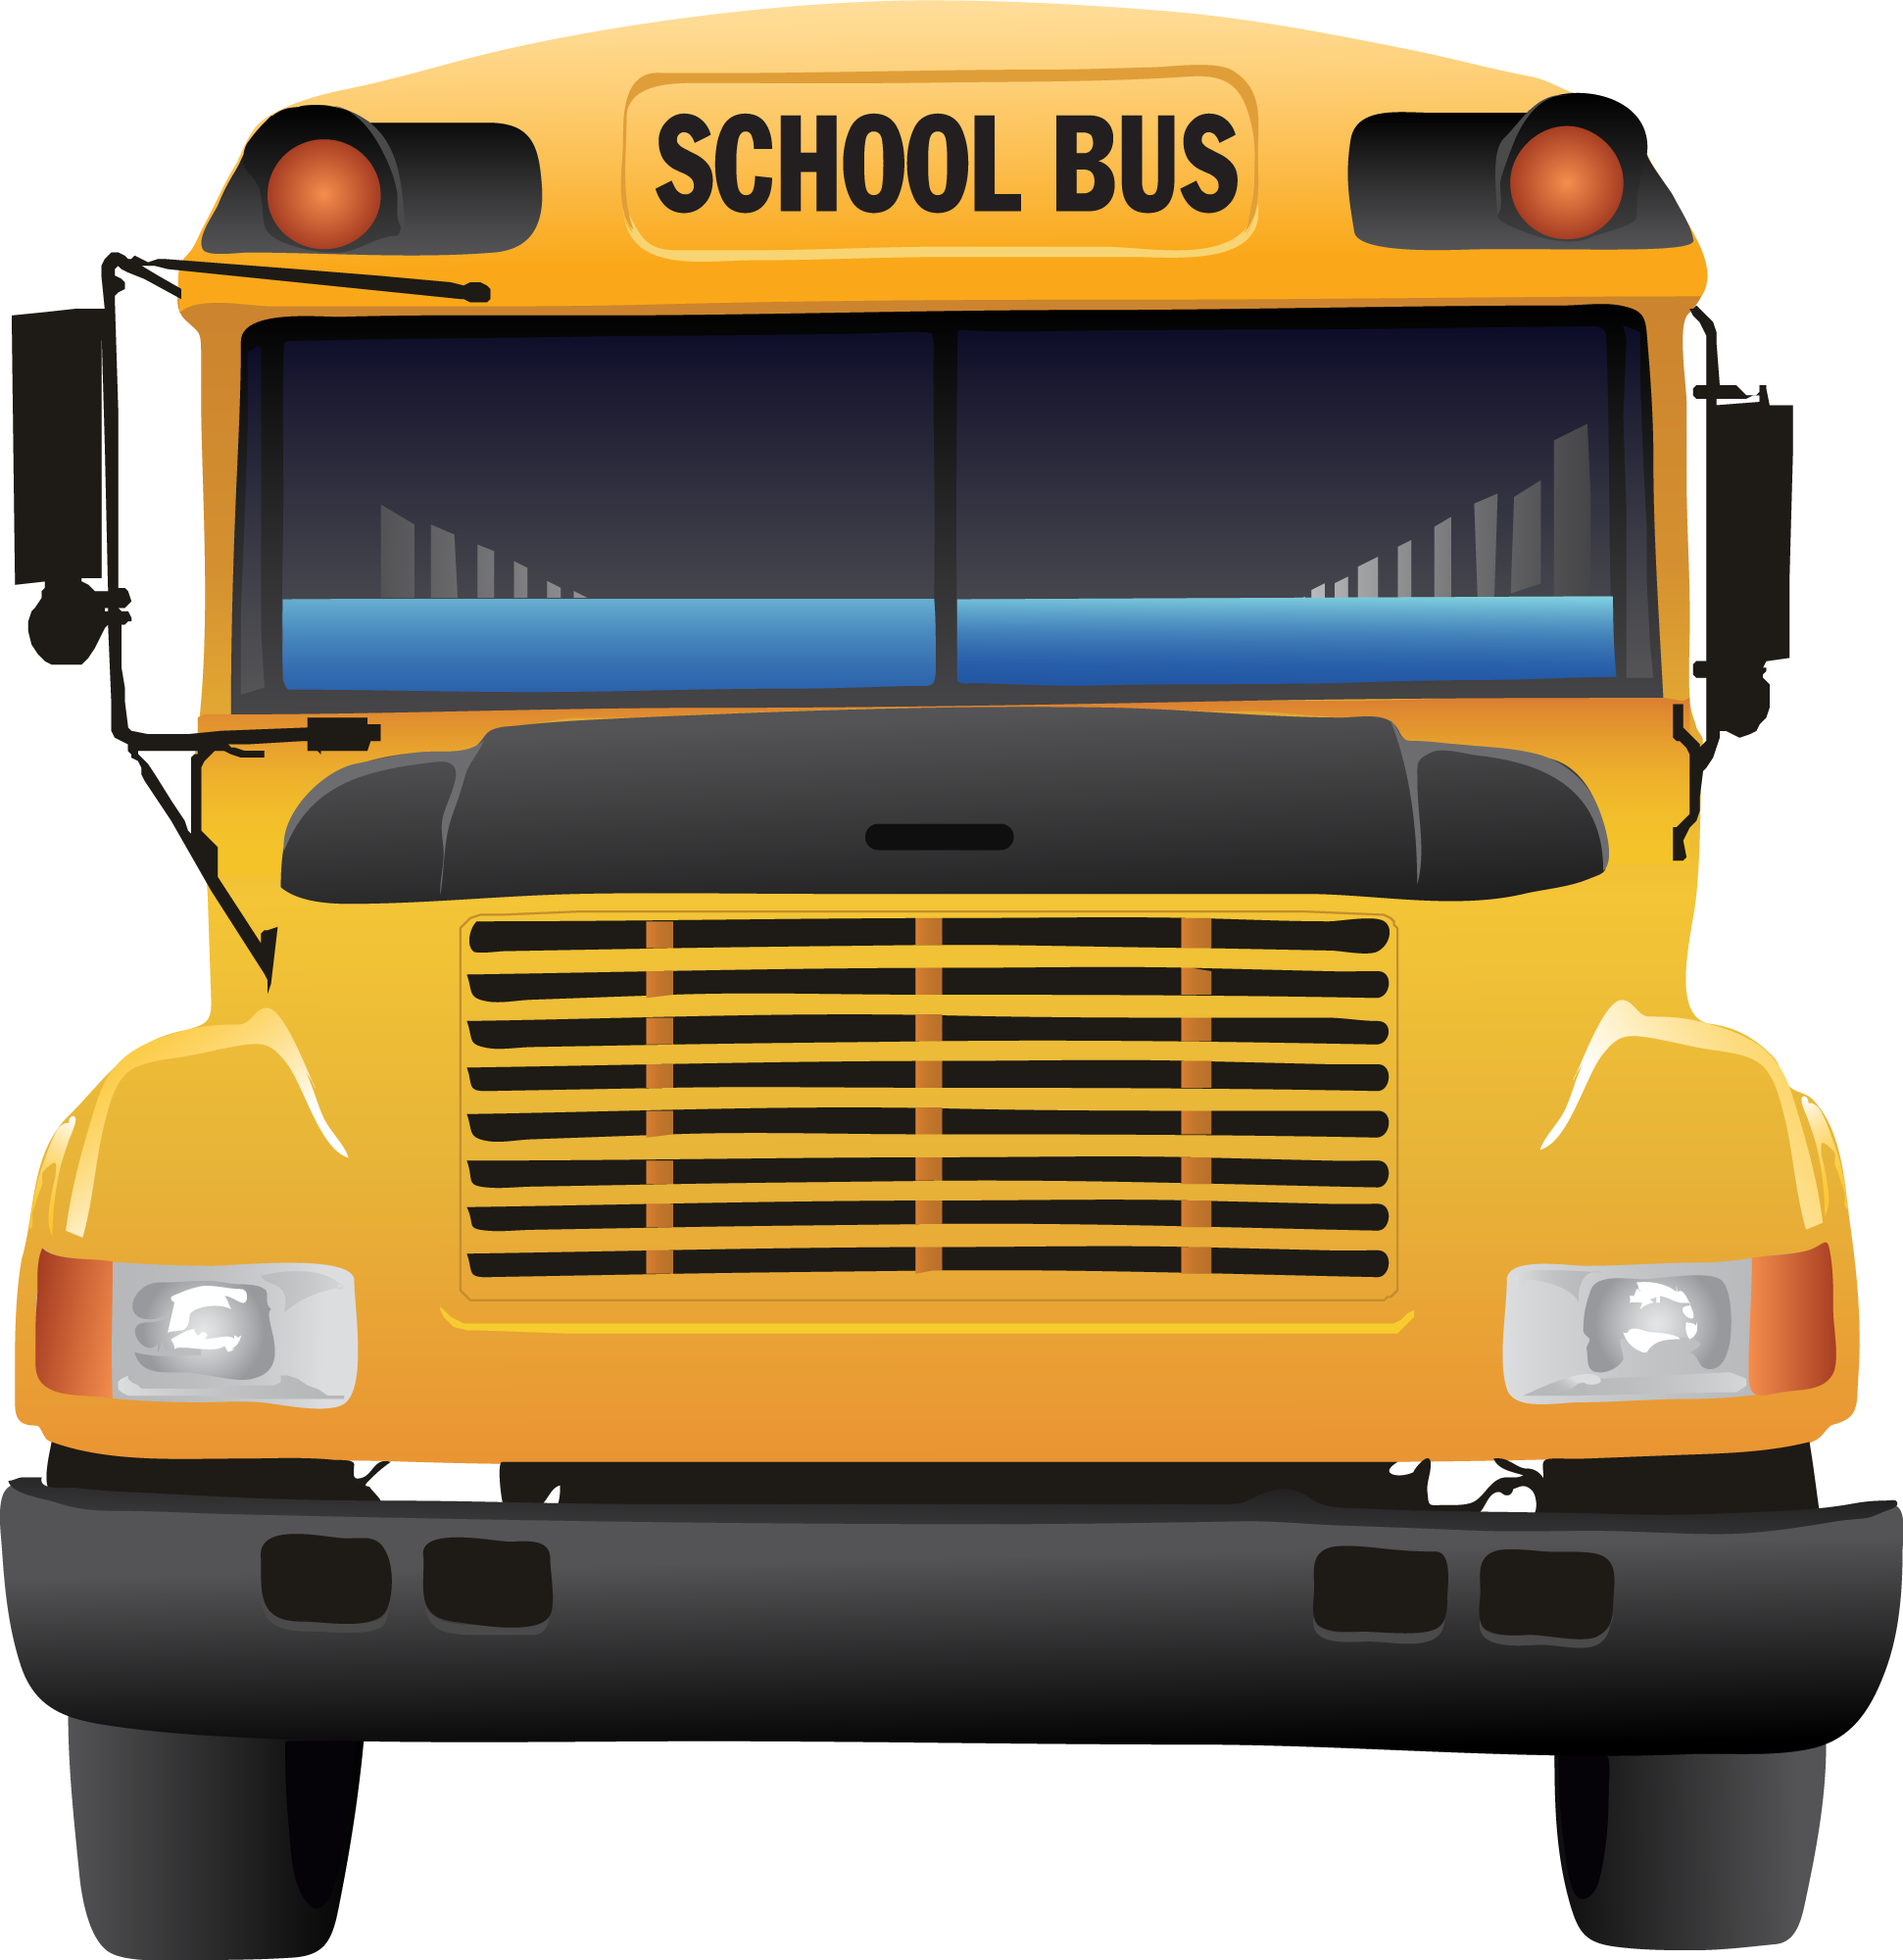 School Bus Image 3.png - Of A School Bus, Transparent background PNG HD thumbnail